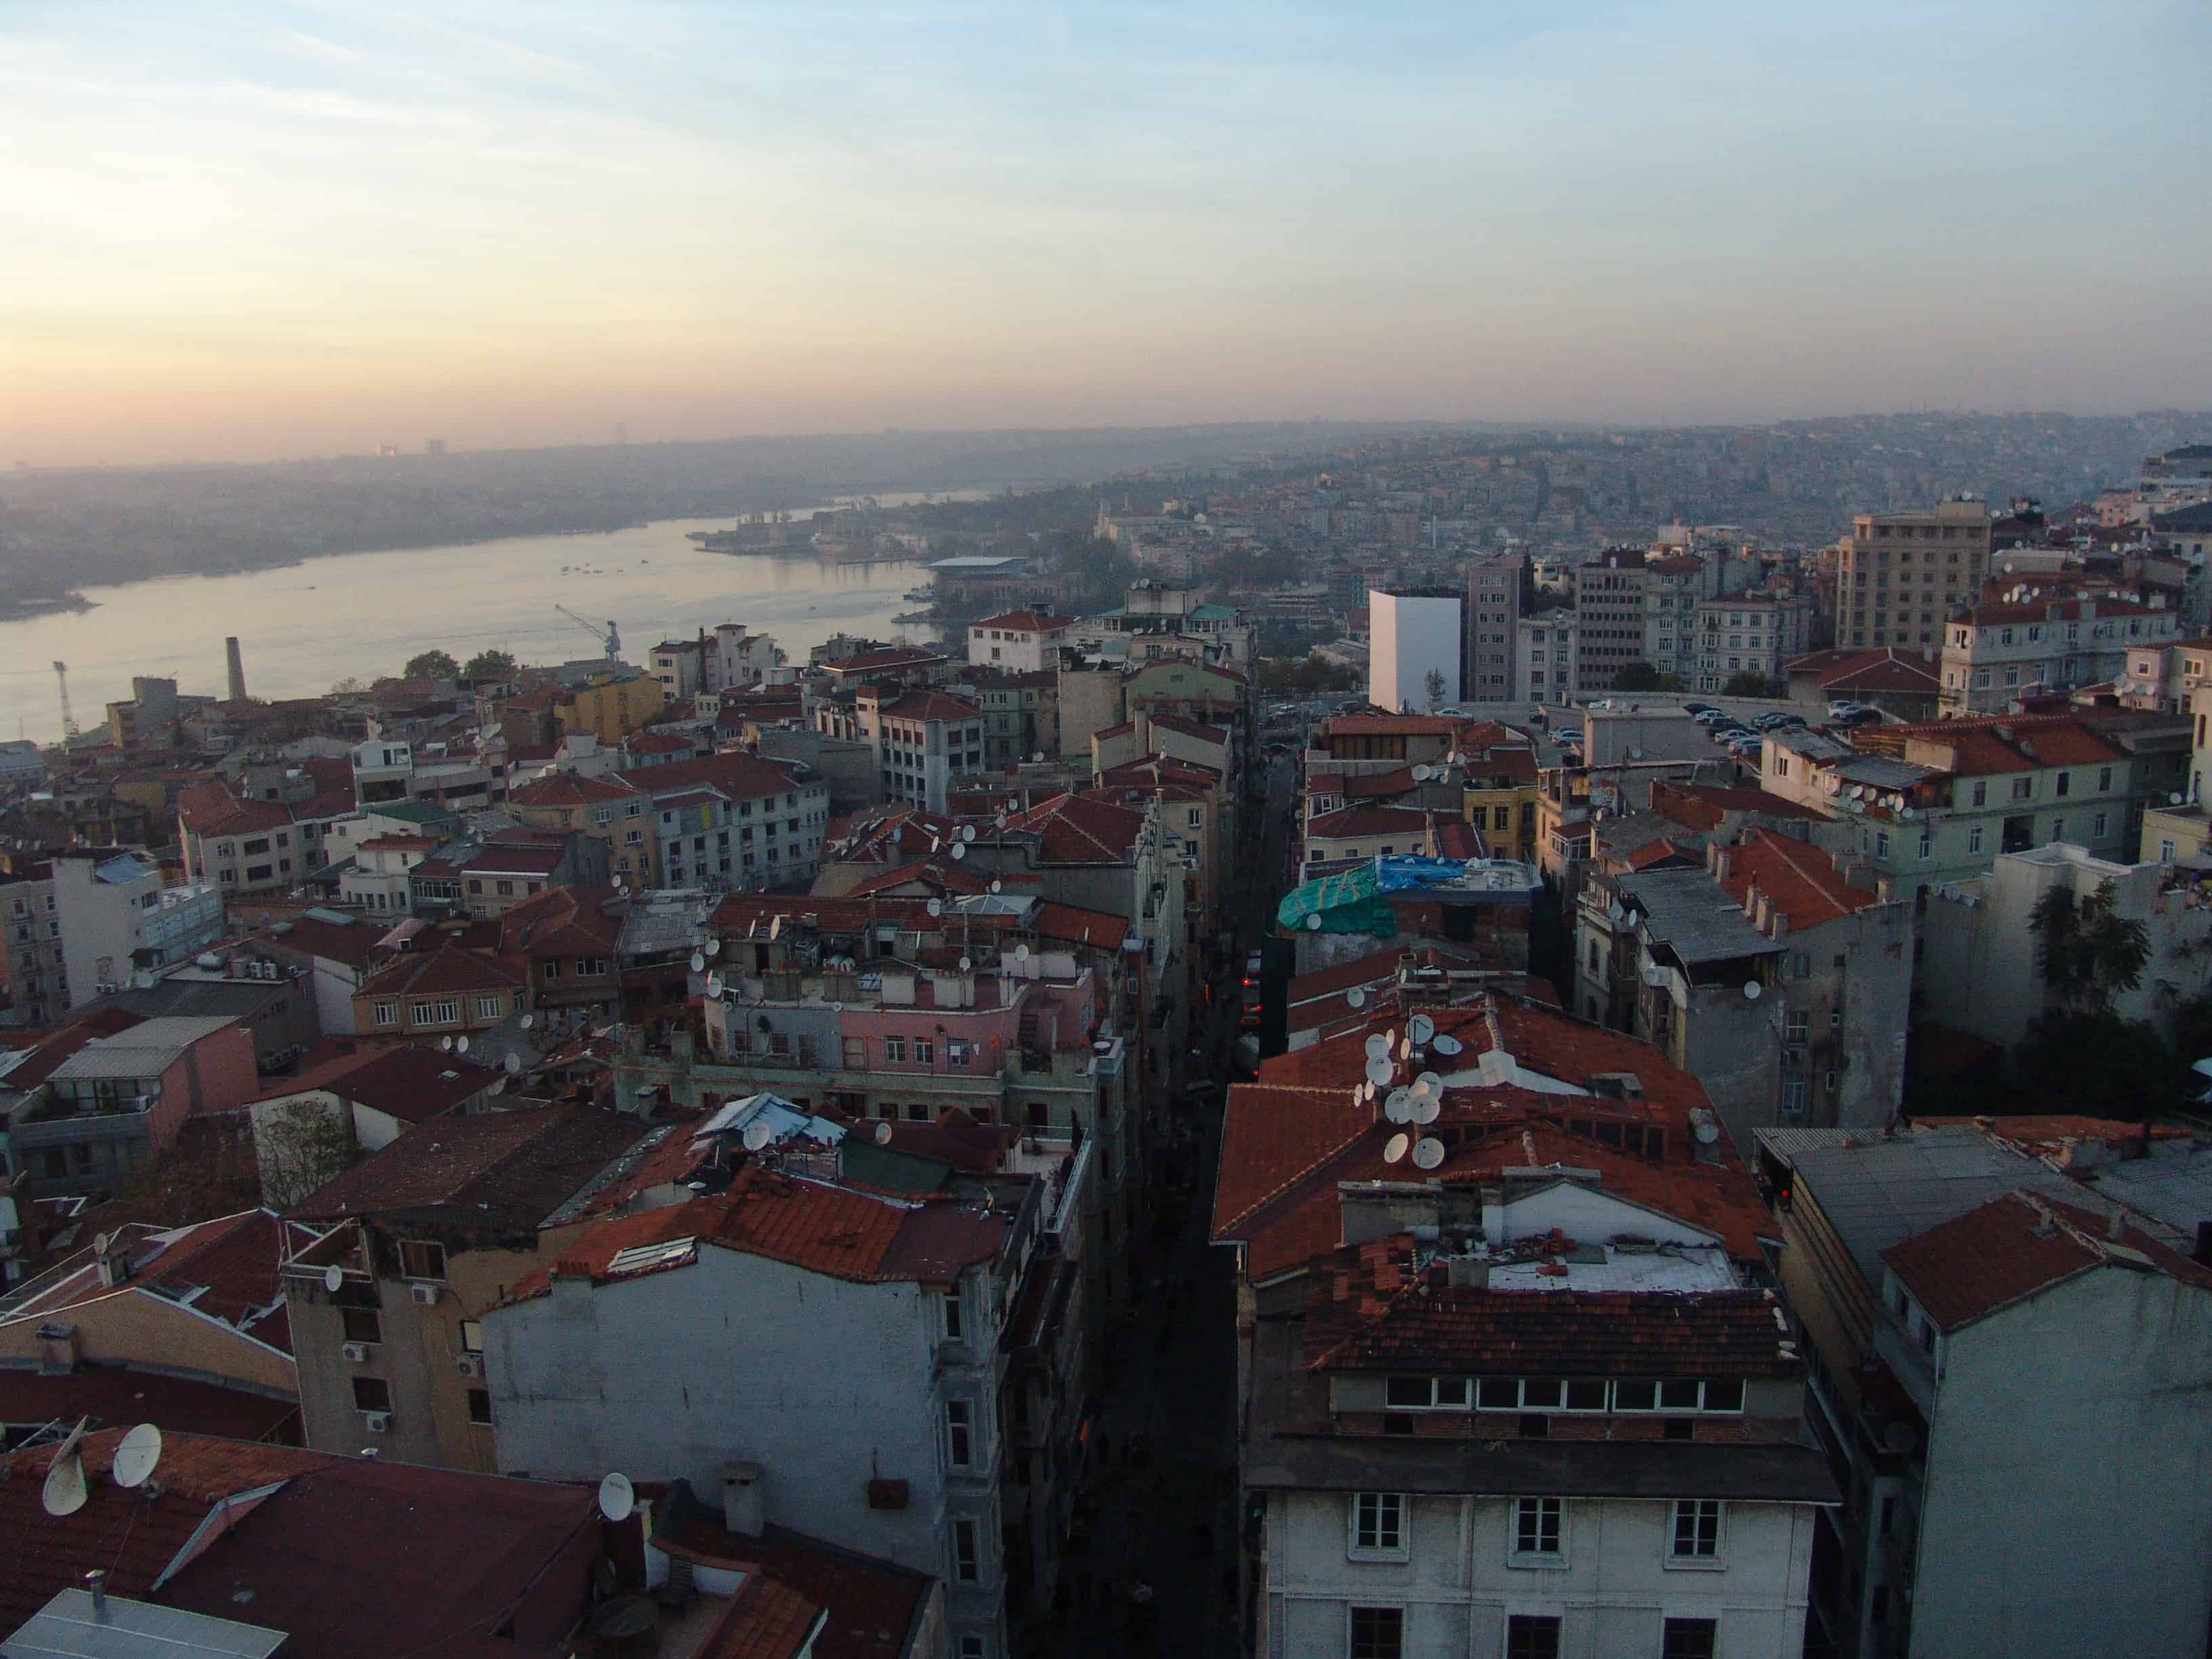 Looking down the Golden Horn from the top of the Galata Tower in Beyoğlu, Istanbul, Turkey